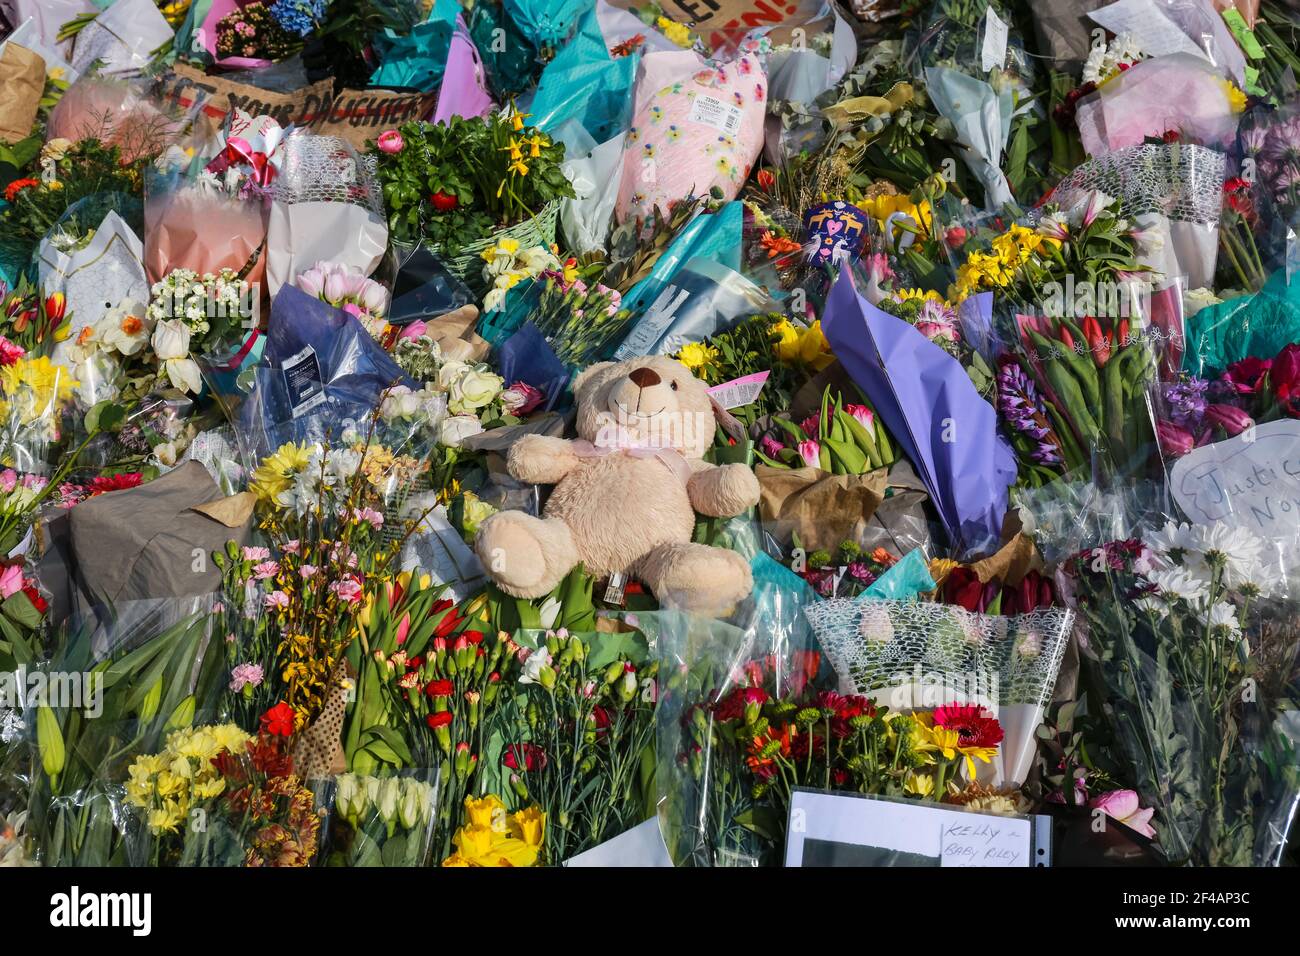 London, UK. 19 March 2021. People pays tribute and flowers to Sarah Everard on Bandstand at Clapham Common. Credit: Waldemar Sikora Stock Photo